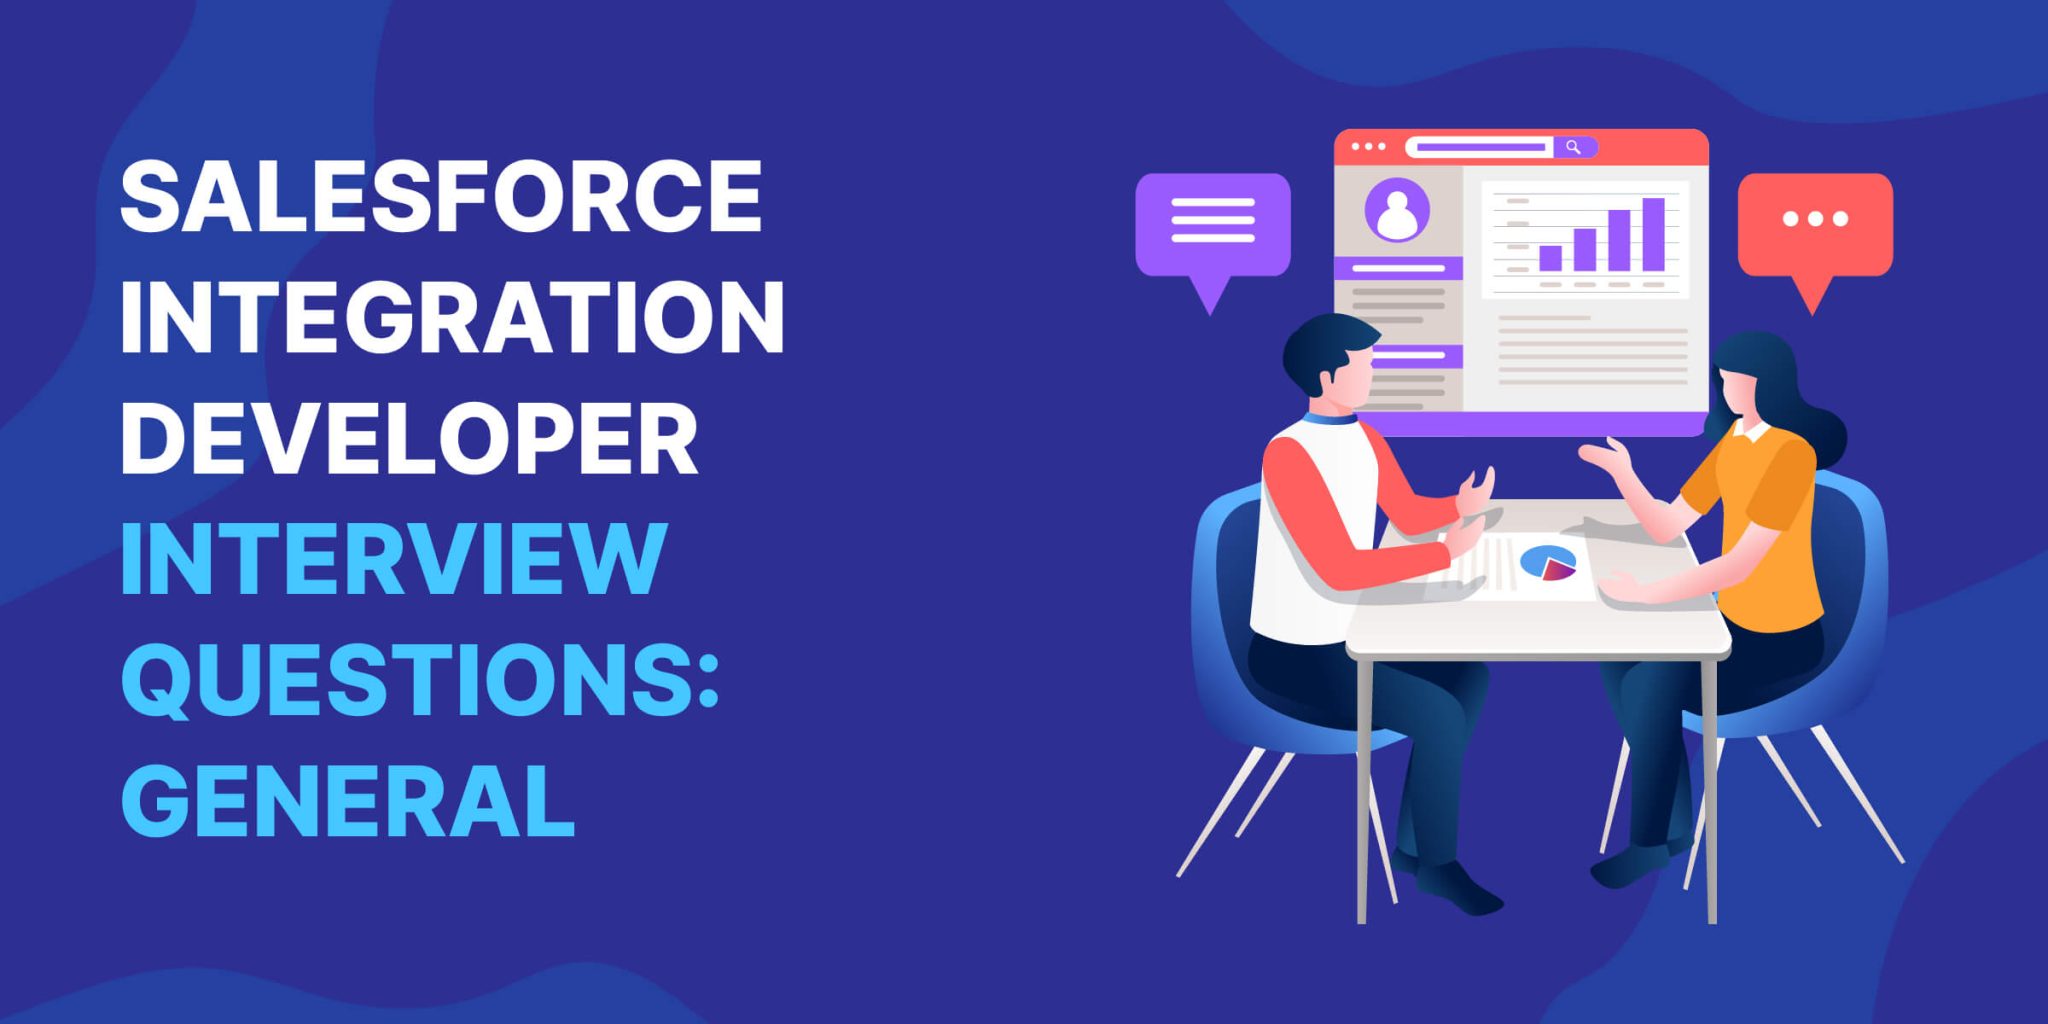 12 Questions To Ask When Hiring a Salesforce Integration Developer